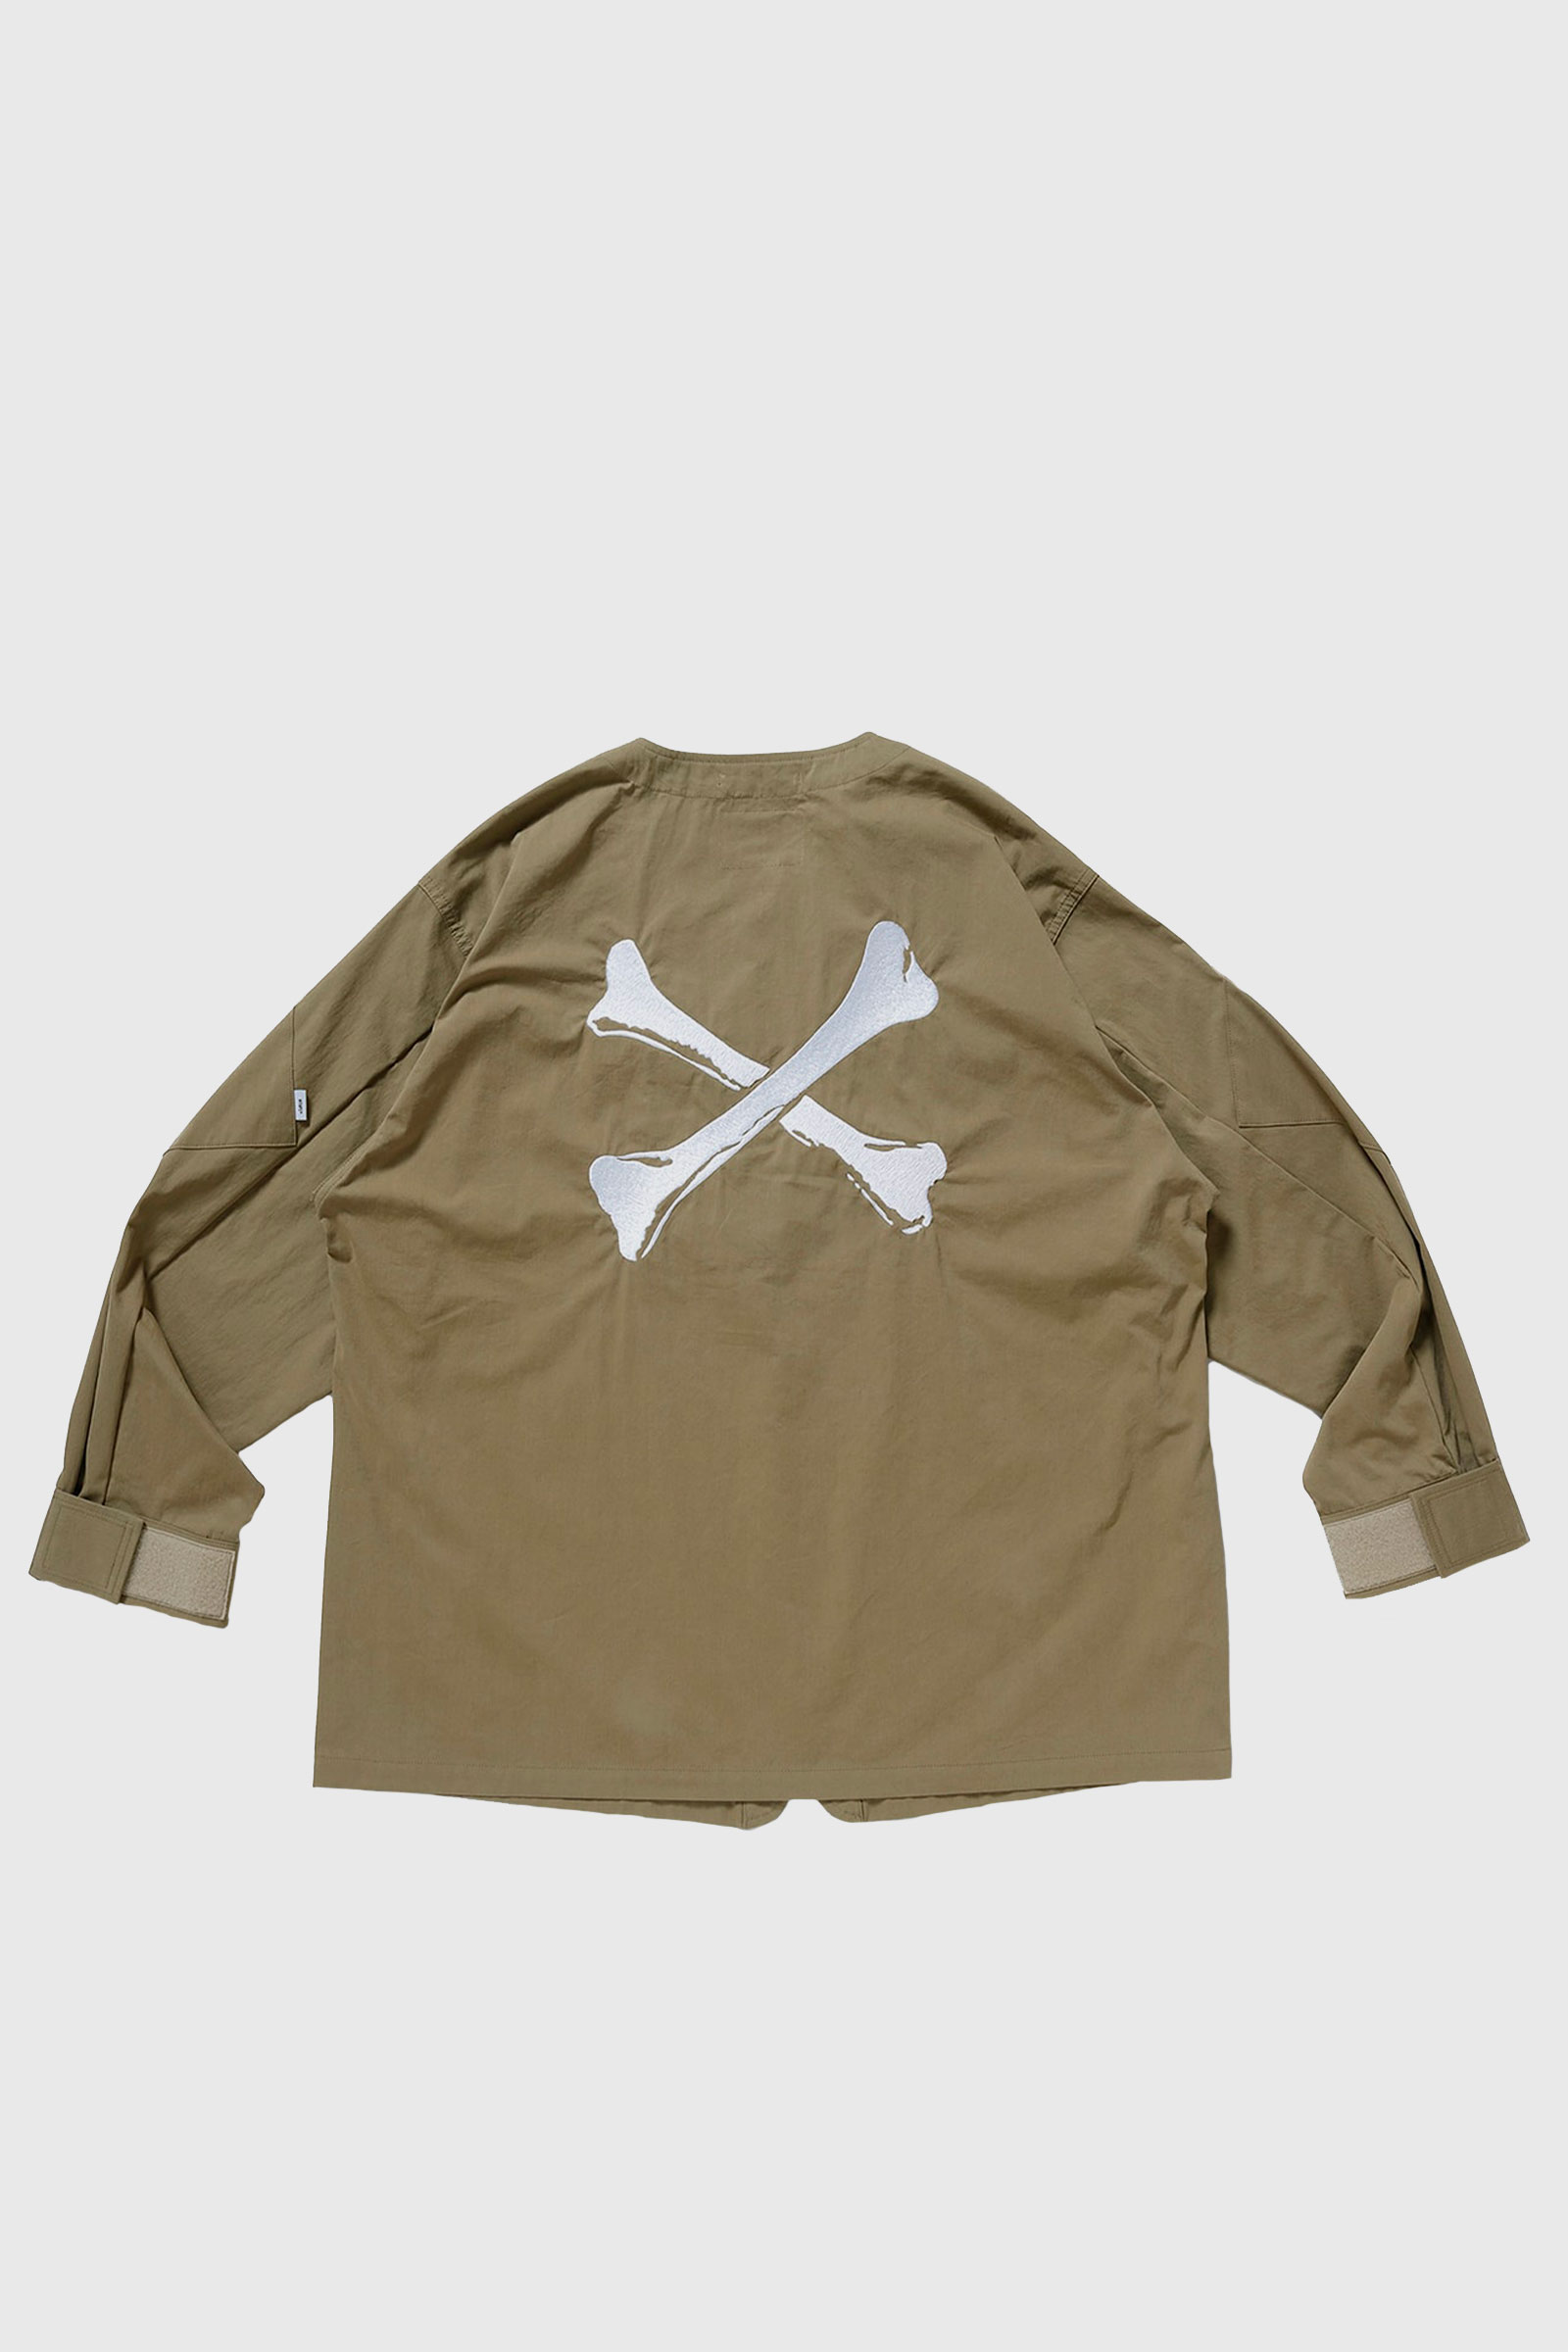 WTAPS SCOUT / LS / NYCO. TUSSAH Beige | WoodWood.com